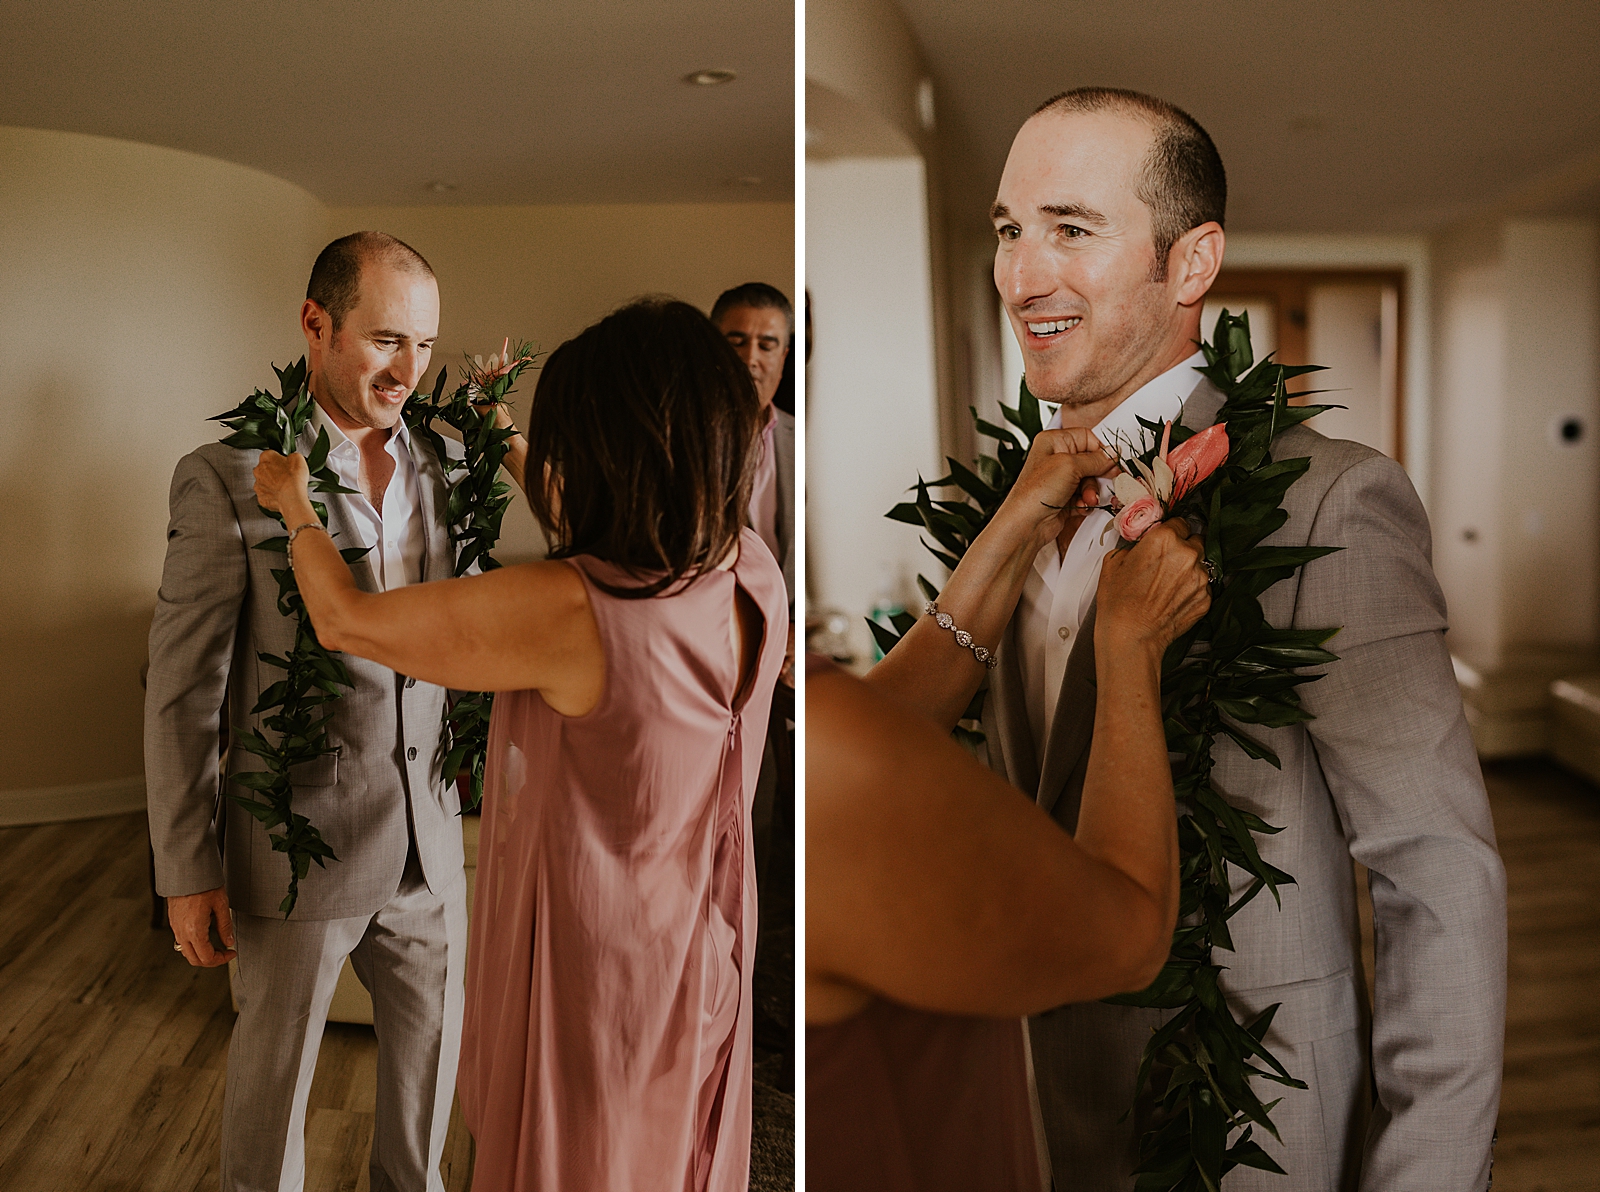 Mother putting lei on Groom Getting Ready in hotel room